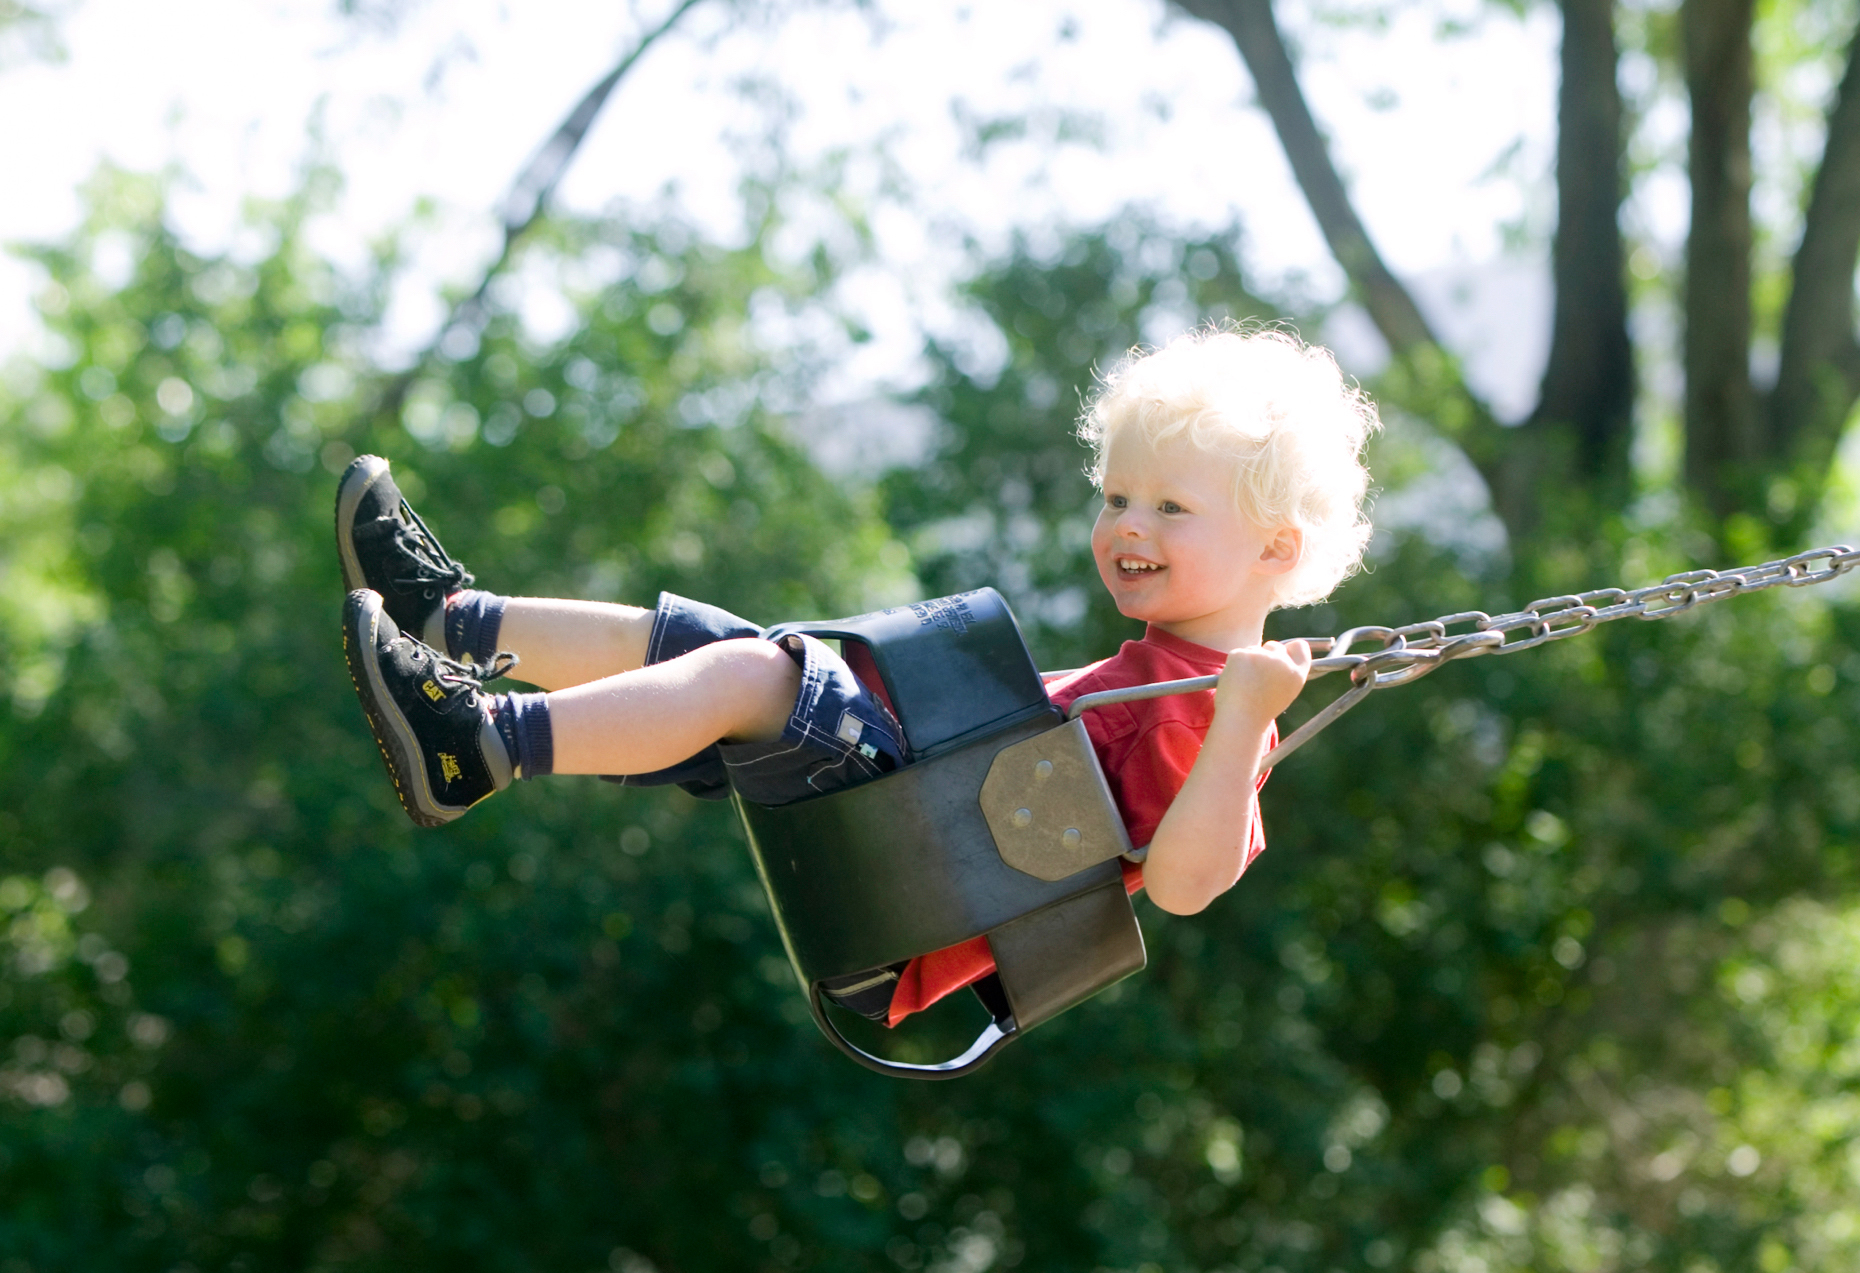 Blonde haired boy swinging on a swing on the playground.